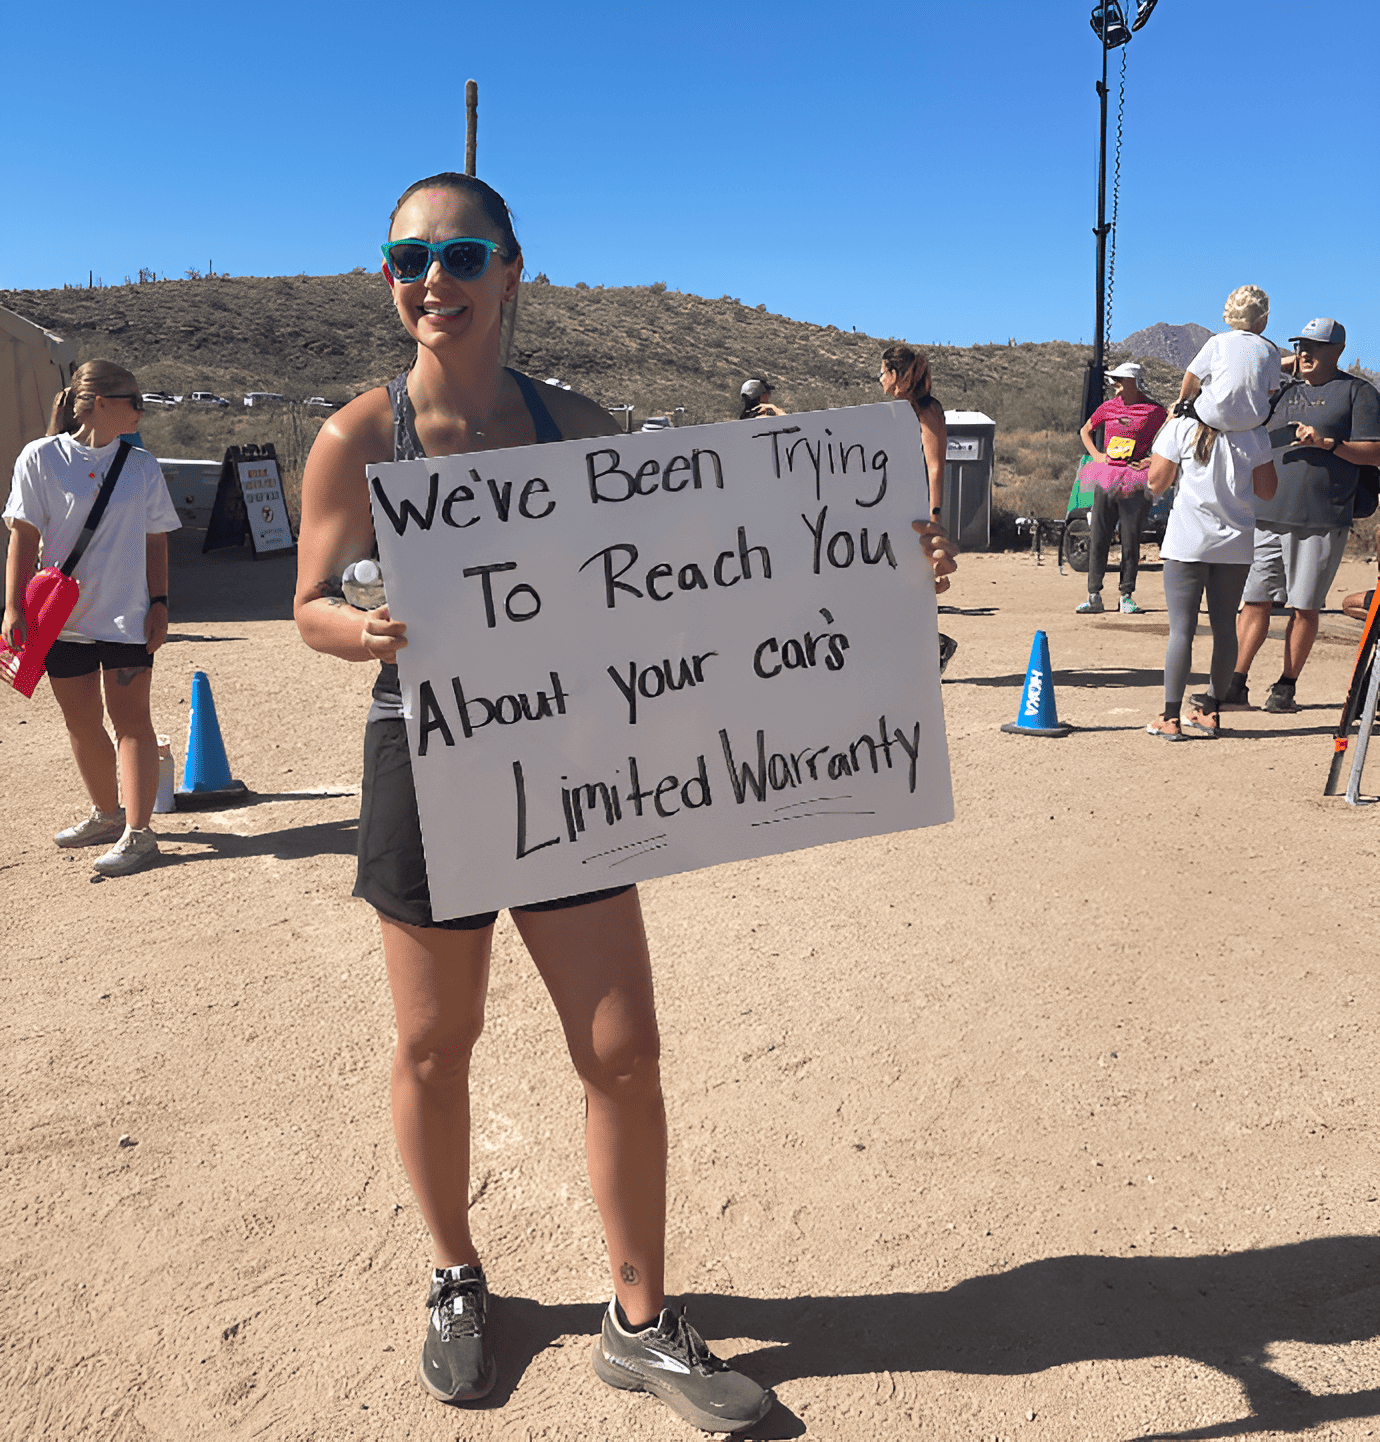 A woman holding a race day sign that says we've been trying to reach you about your car's limited warranty. 